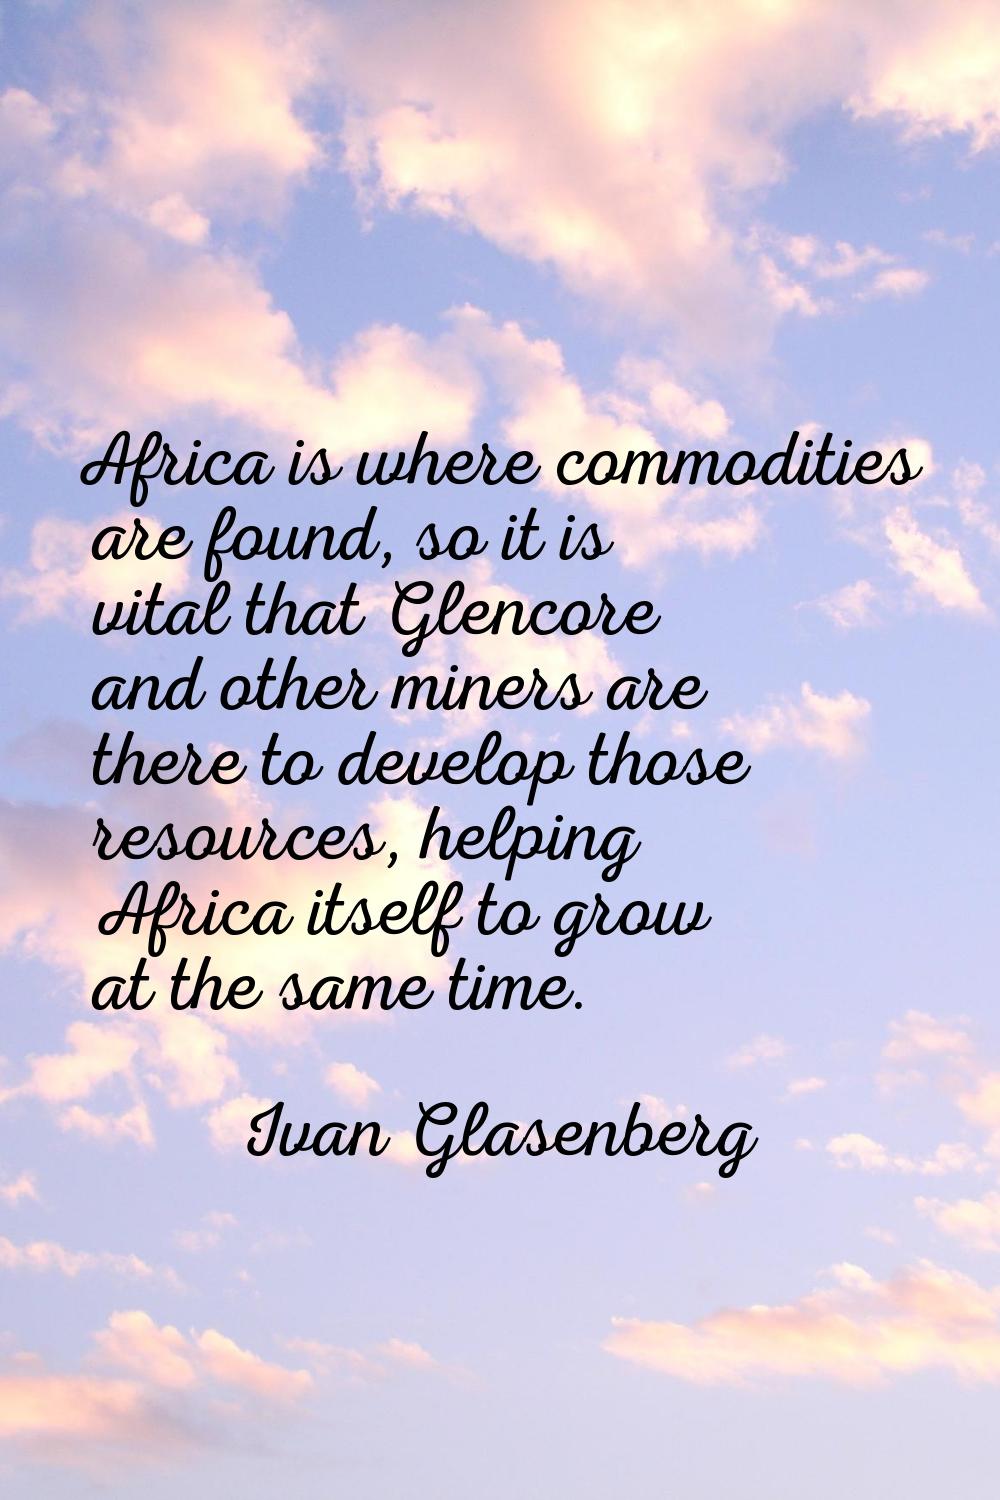 Africa is where commodities are found, so it is vital that Glencore and other miners are there to d